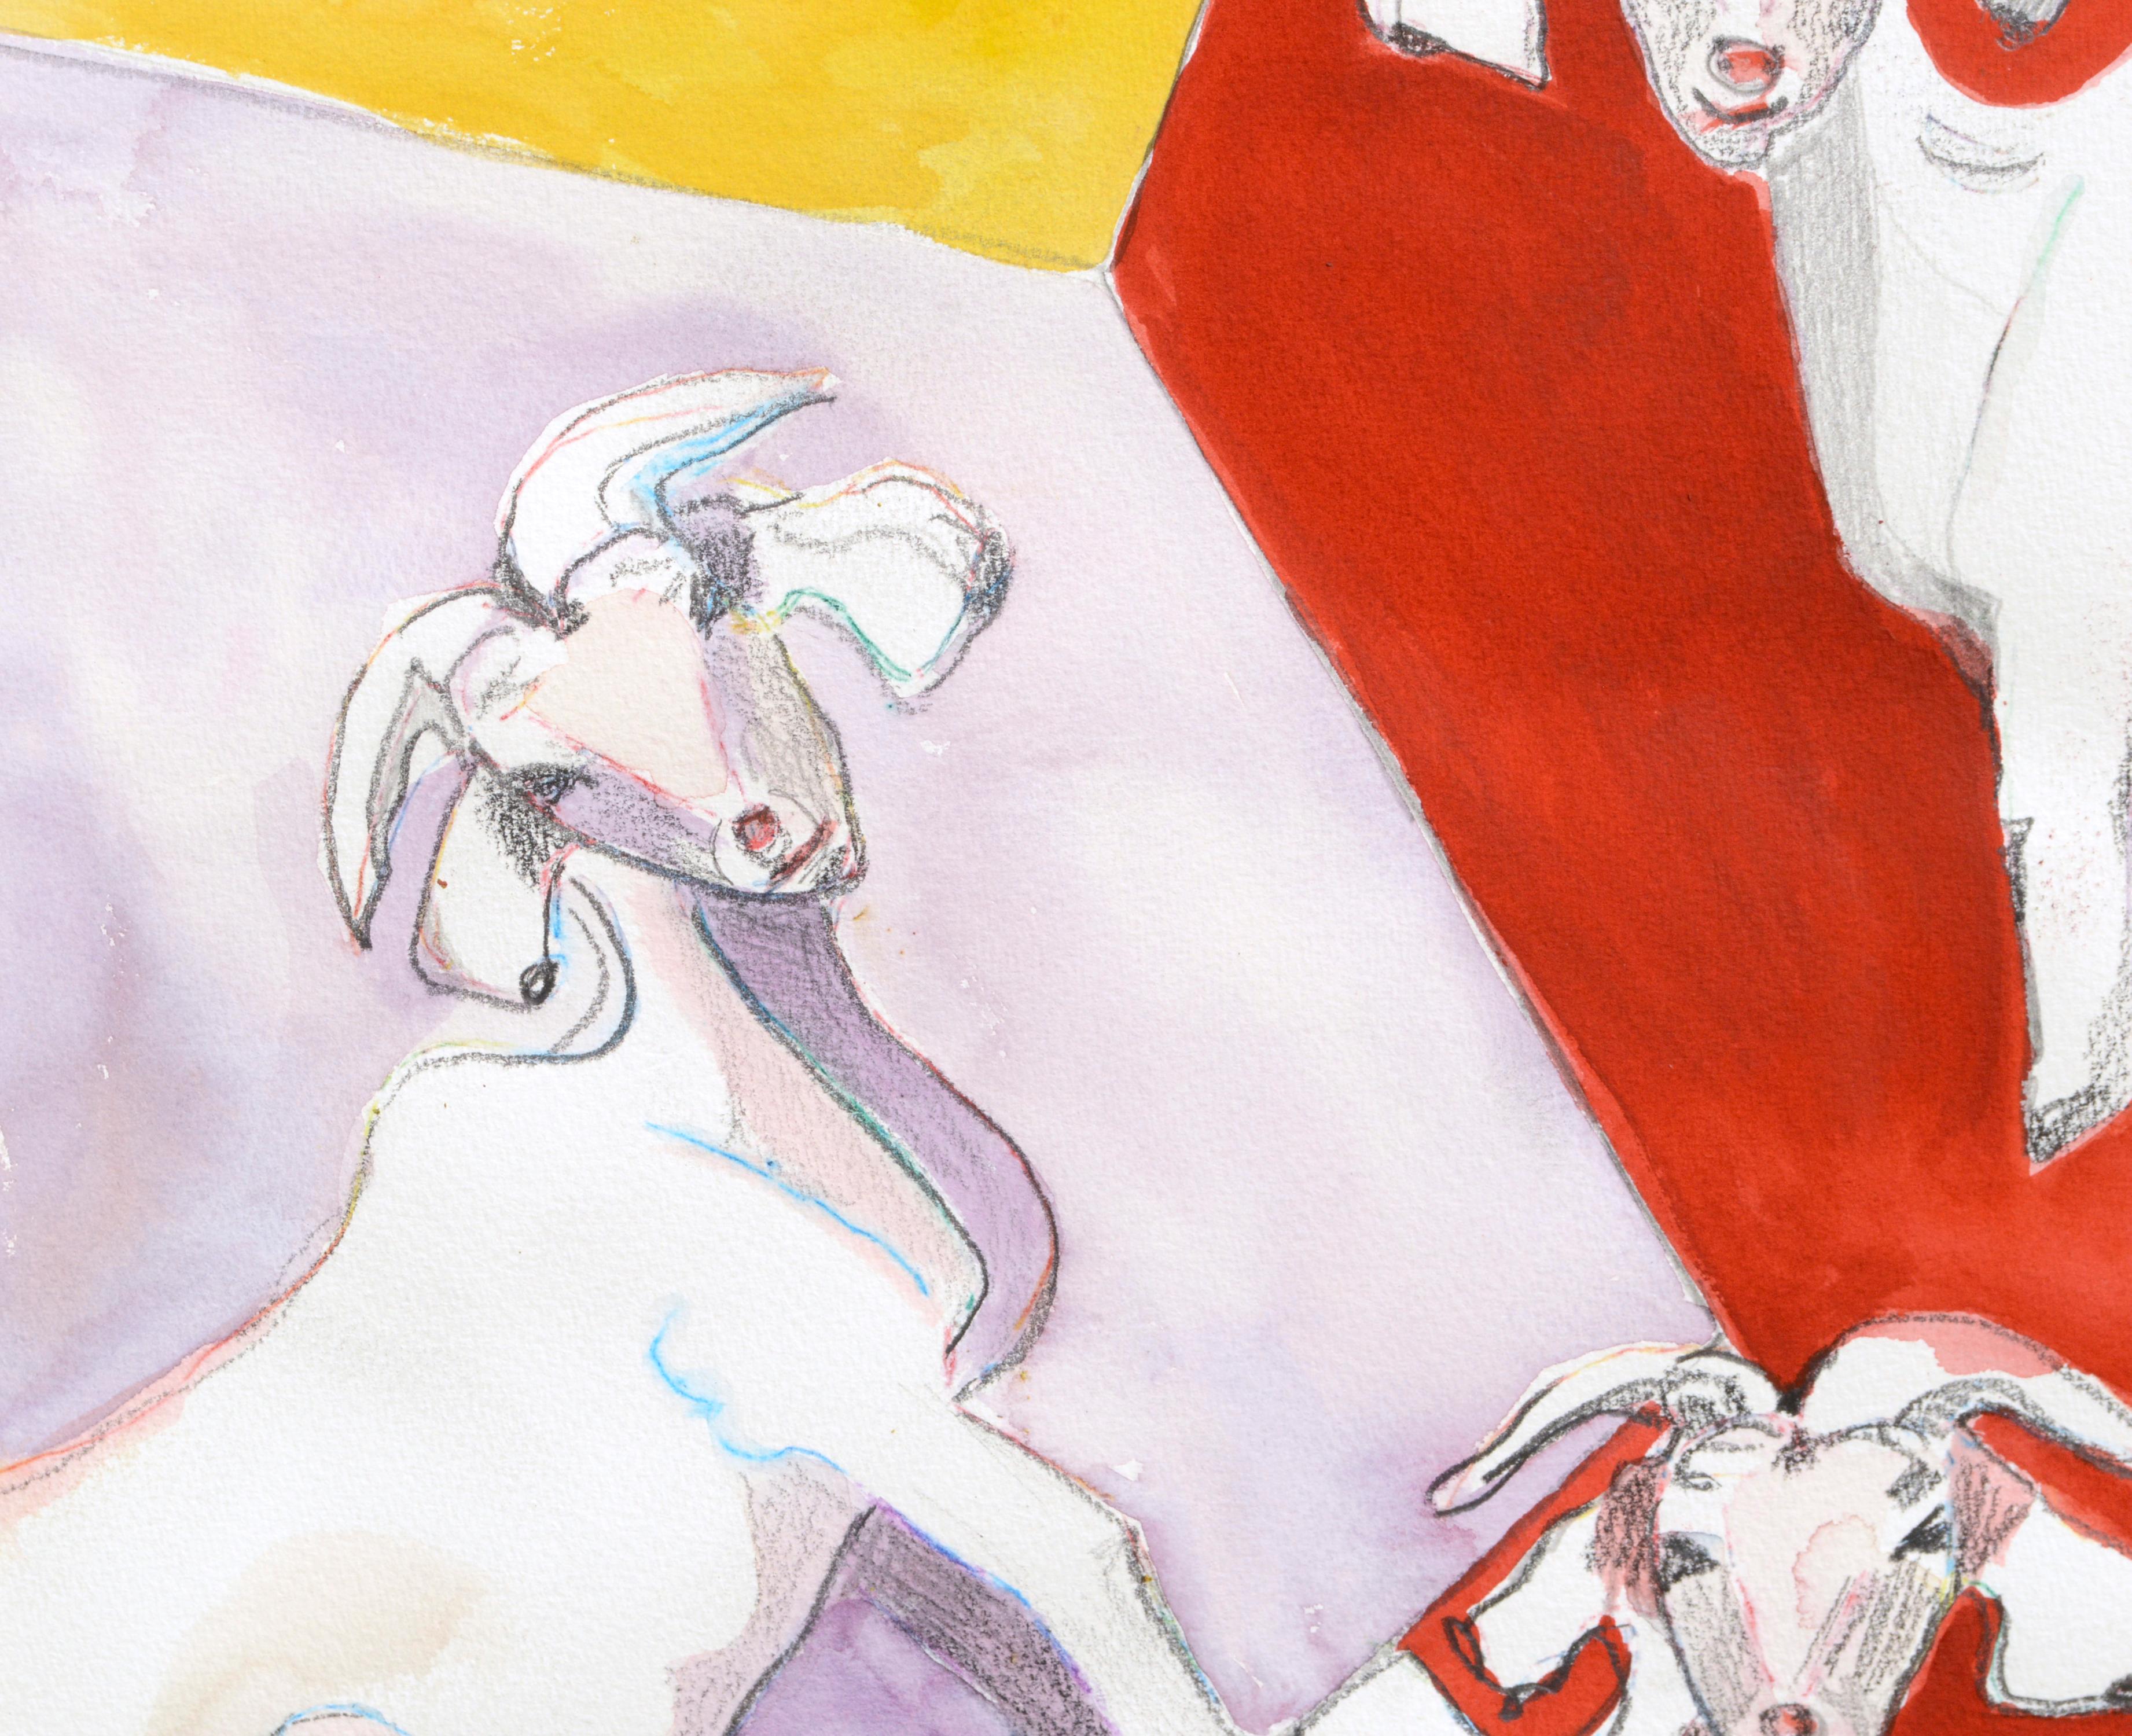 Fun and bright watercolor with goats, the form of the goat repeating on a bold abstract background of fractured color-fields in highly saturated hues, by Karen Druker (American, 1945). Signed 